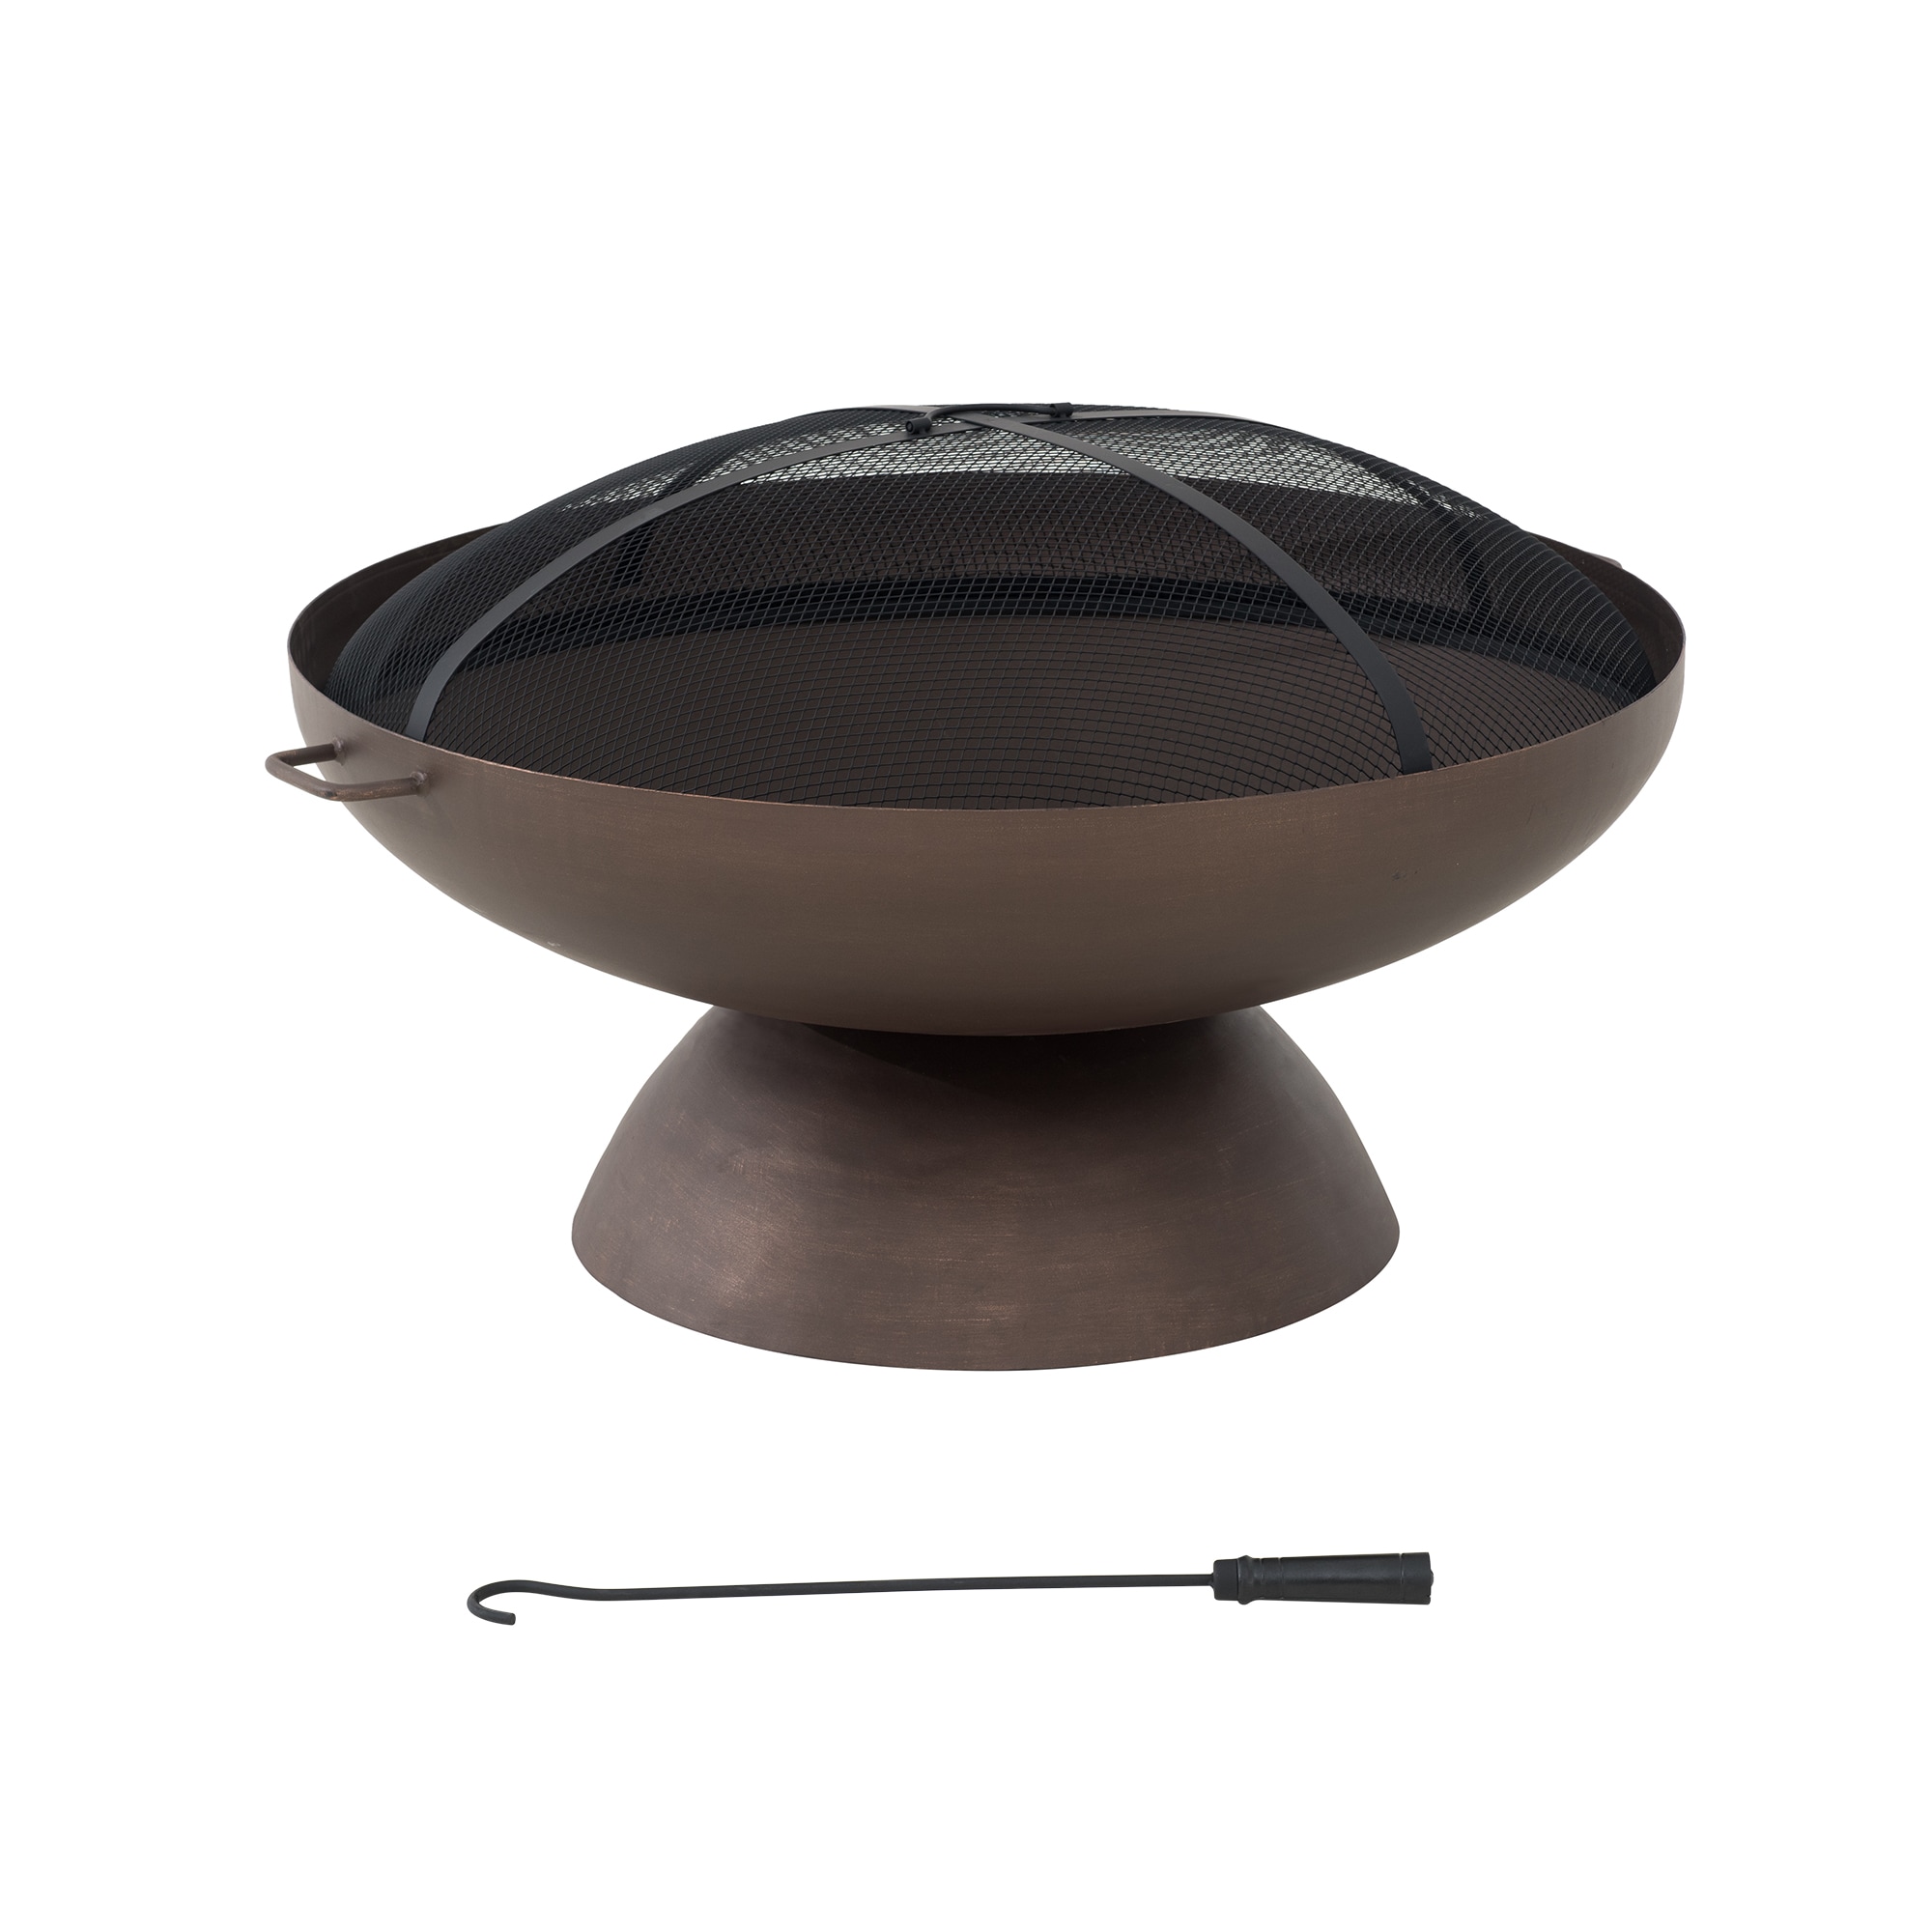 In Dennison Wood Burning Fire Pit, Wood Burning Fire Pit Bowl Replacement